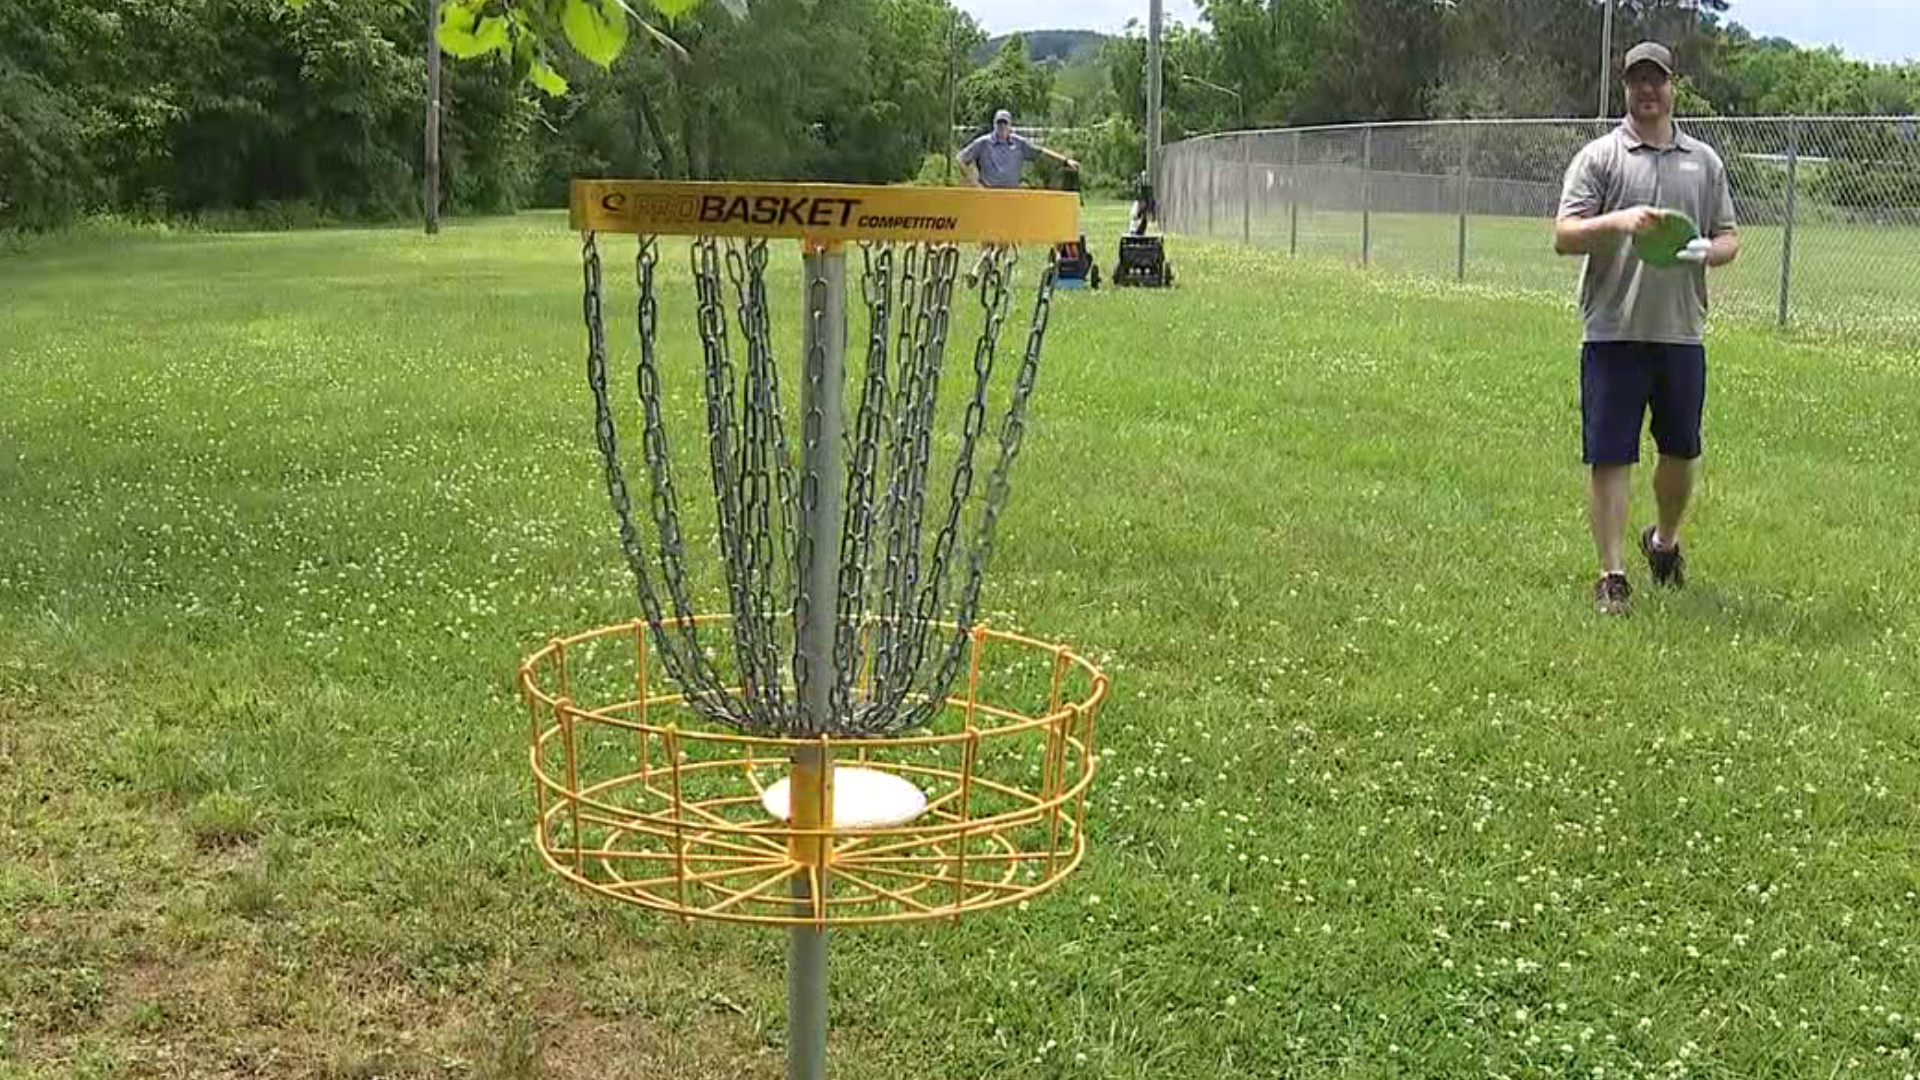 Indian Park in Montoursville is now open to a new disc golf course.